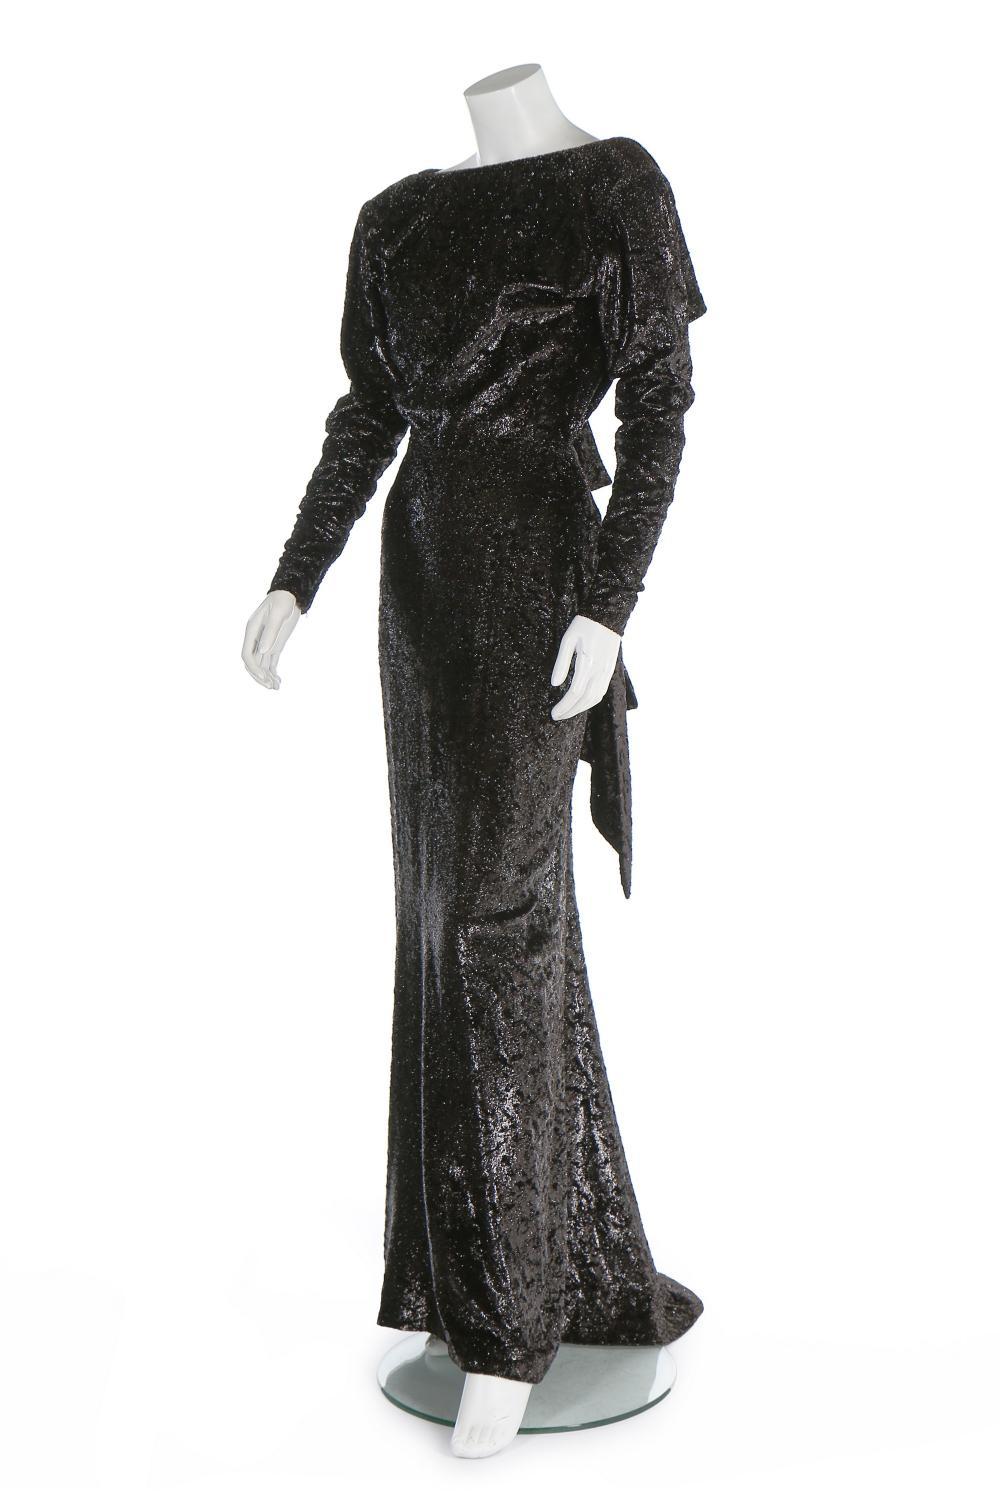 Very Rare 2 in 1 Yves Saint Laurent Haute Couture Twinkly Anthracite Dress Gown
C. 1986, Label N - 60253
Can be Used in 2 Different Ways Because of Snaps
Crushed Twinkly Anthracite Velvet with Animal Print, Cut-Out Details, Open Back, 3D Flower, Zip